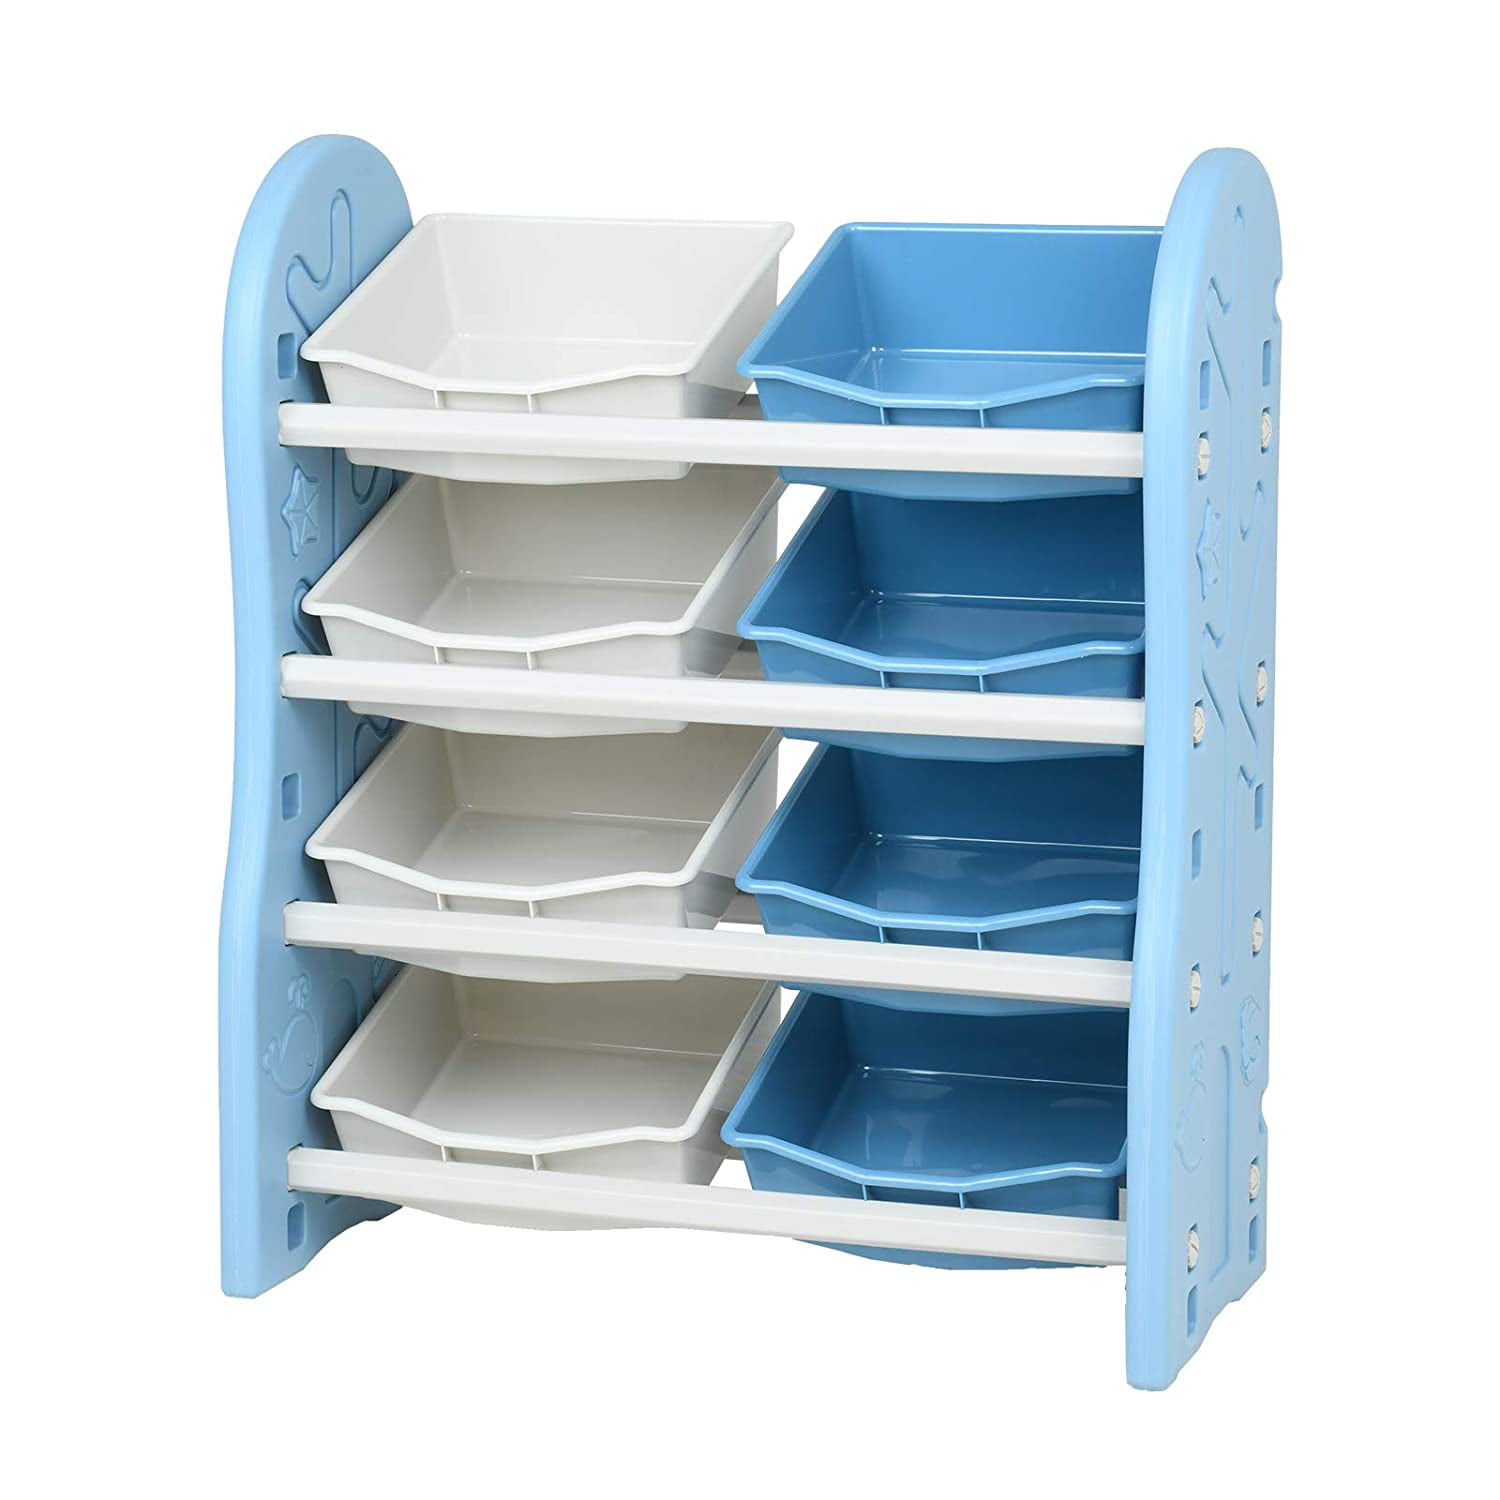 Uenjoy 2 in 1 Kids Toy Storage Rack with Bookshelf &8 Large Storage Drawers,Suitable for Boys Girls Bedroom and Kindergarten Safe Material-Blue 4 Combinations Living Room